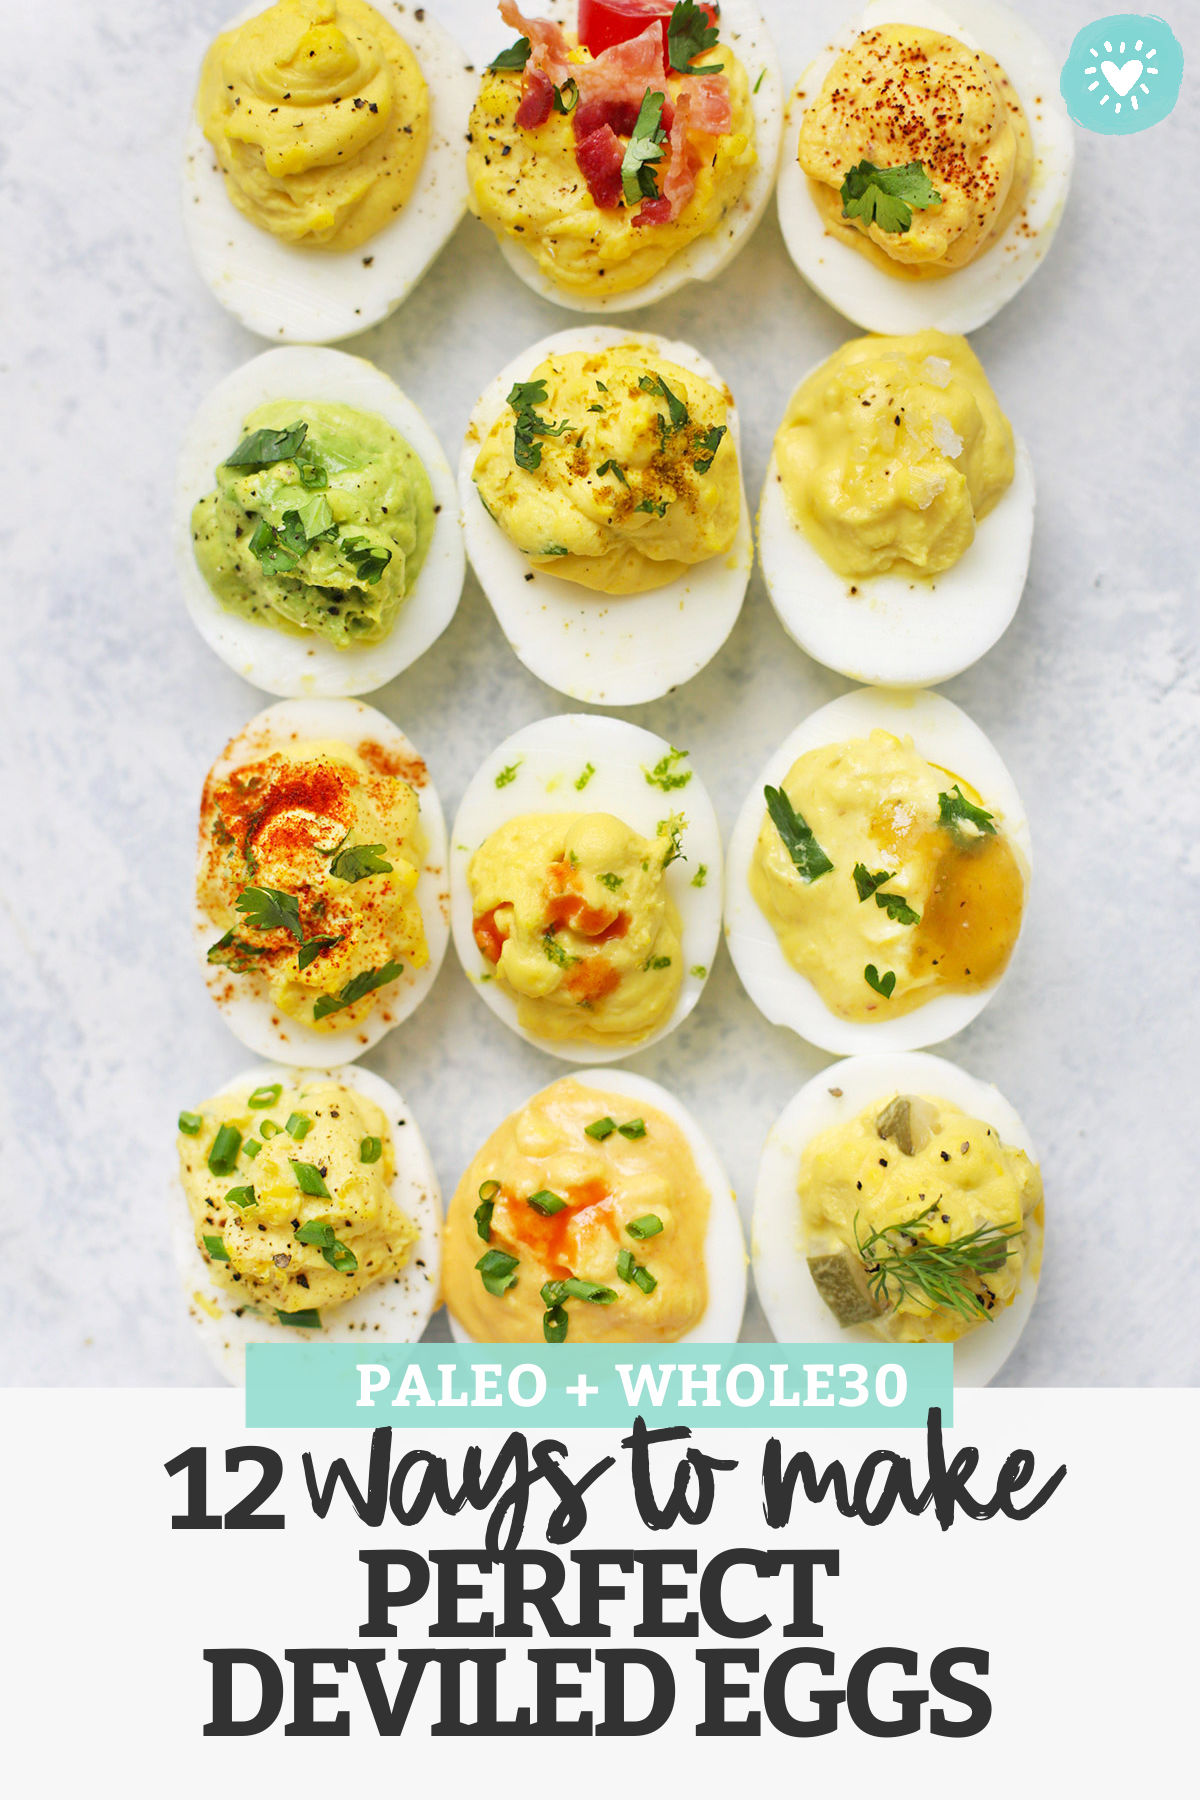 How to Make Perfect Deviled Eggs - My FAVORITE method for deviled eggs plus TWELVE delicious flavor combinations! All are paleo approved, gluten free, and absolutely delicious. // Paleo deviled eggs // the best deviled eggs recipe // deviled eggs no mayo // classic deviled eggs // perfect deviled eggs // 12 flavors of deviled eggs // whole30 deviled eggs // healthy deviled eggs //